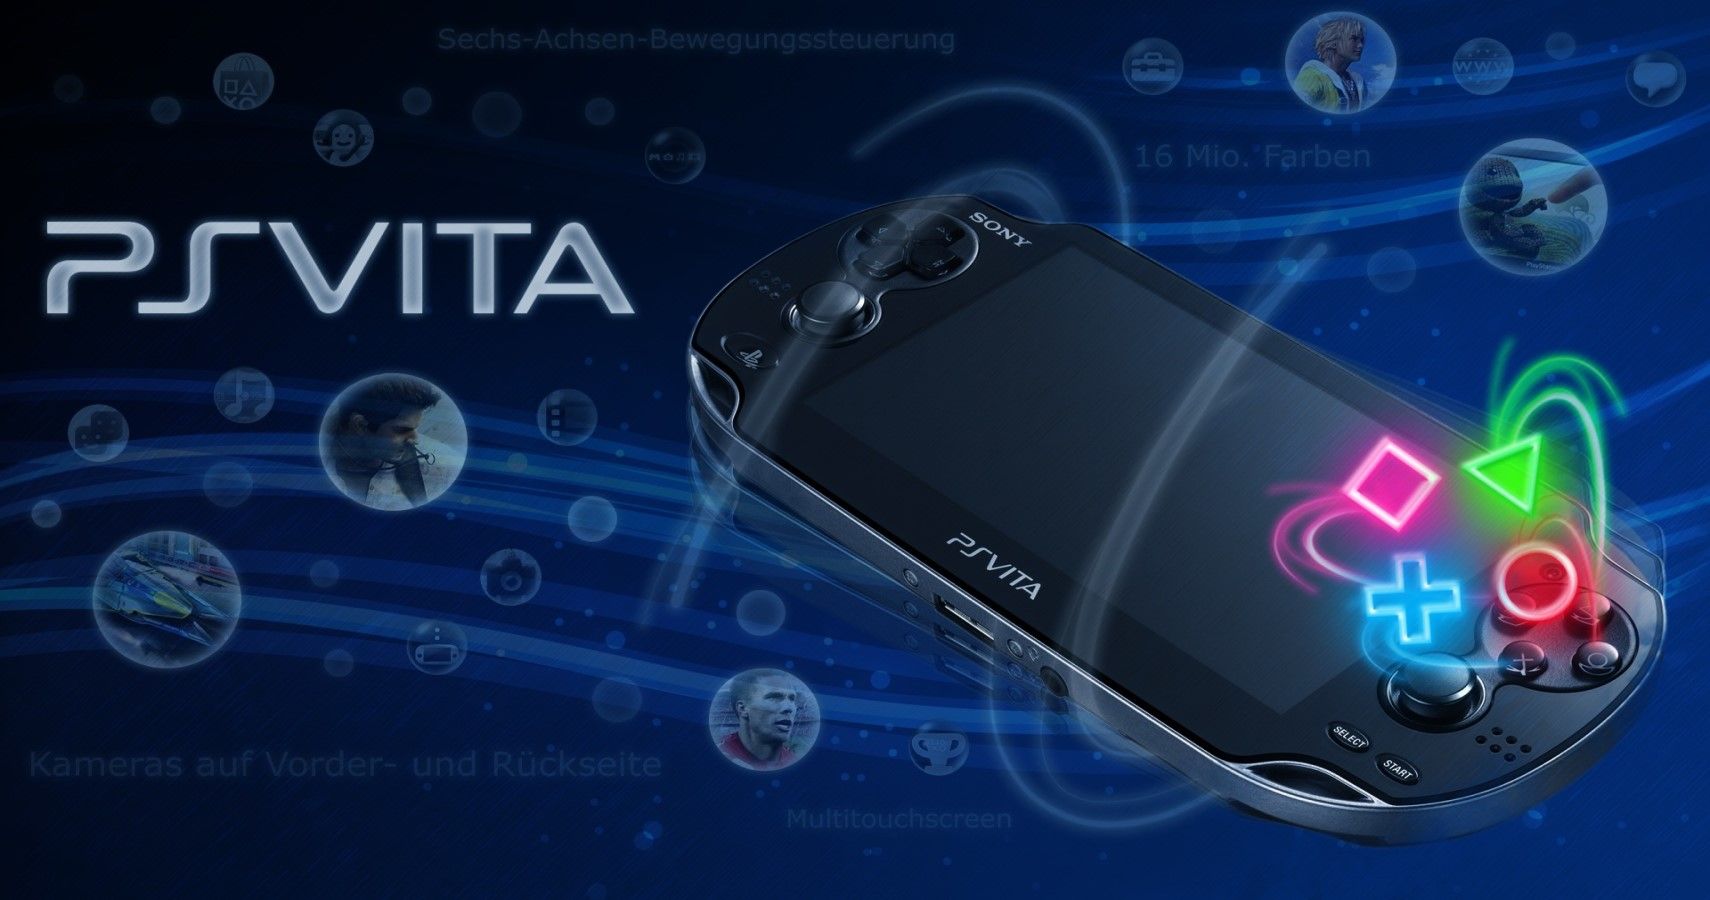 Sony Should Let The Vita Die In Peace Or Release More Games